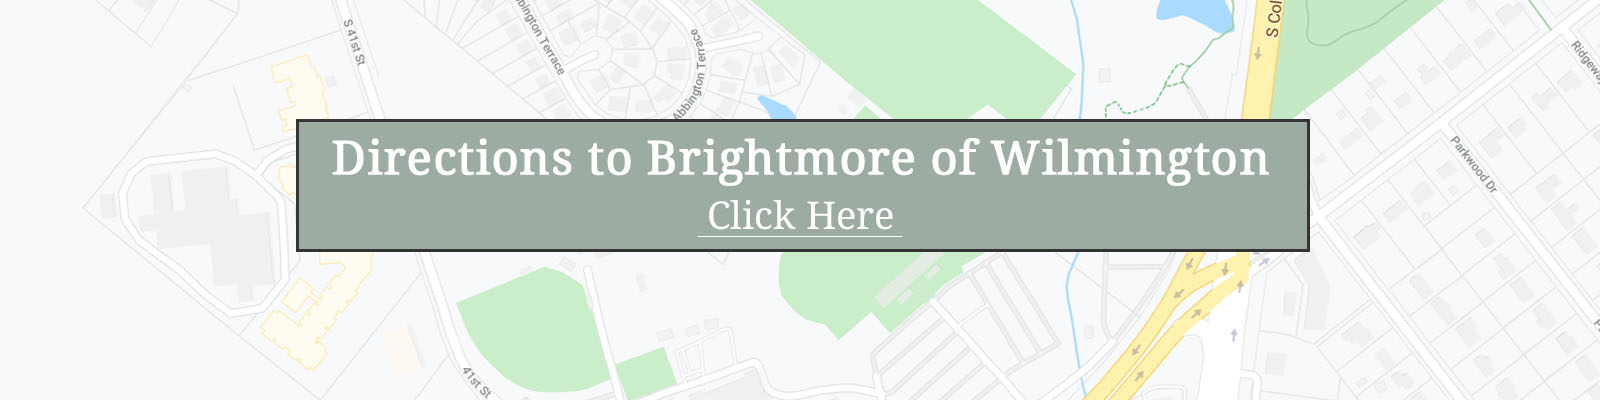 Brightmore of Wilmington map and directions to our Senior Living Community